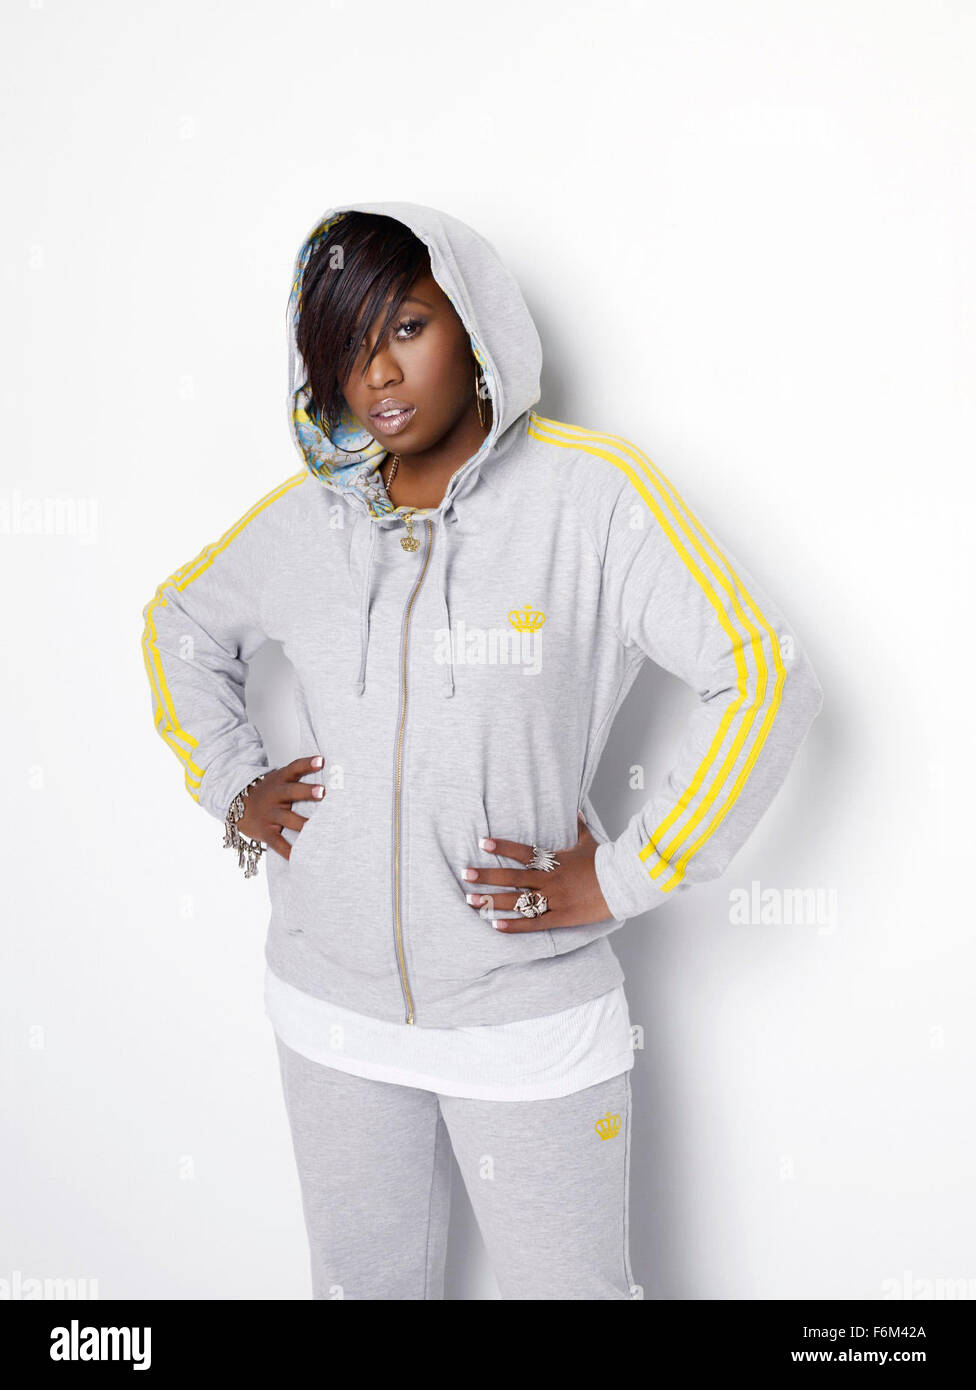 RELEASE DATE: February 14, 2008. MOVIE TITLE: Step Up 2. STUDIO: Touchstone Pictures. PLOT: Romantic sparks occur between two dance students from different backgrounds at the Maryland School of the Arts. PICTURED: MISSY ELLIOT. Stock Photo